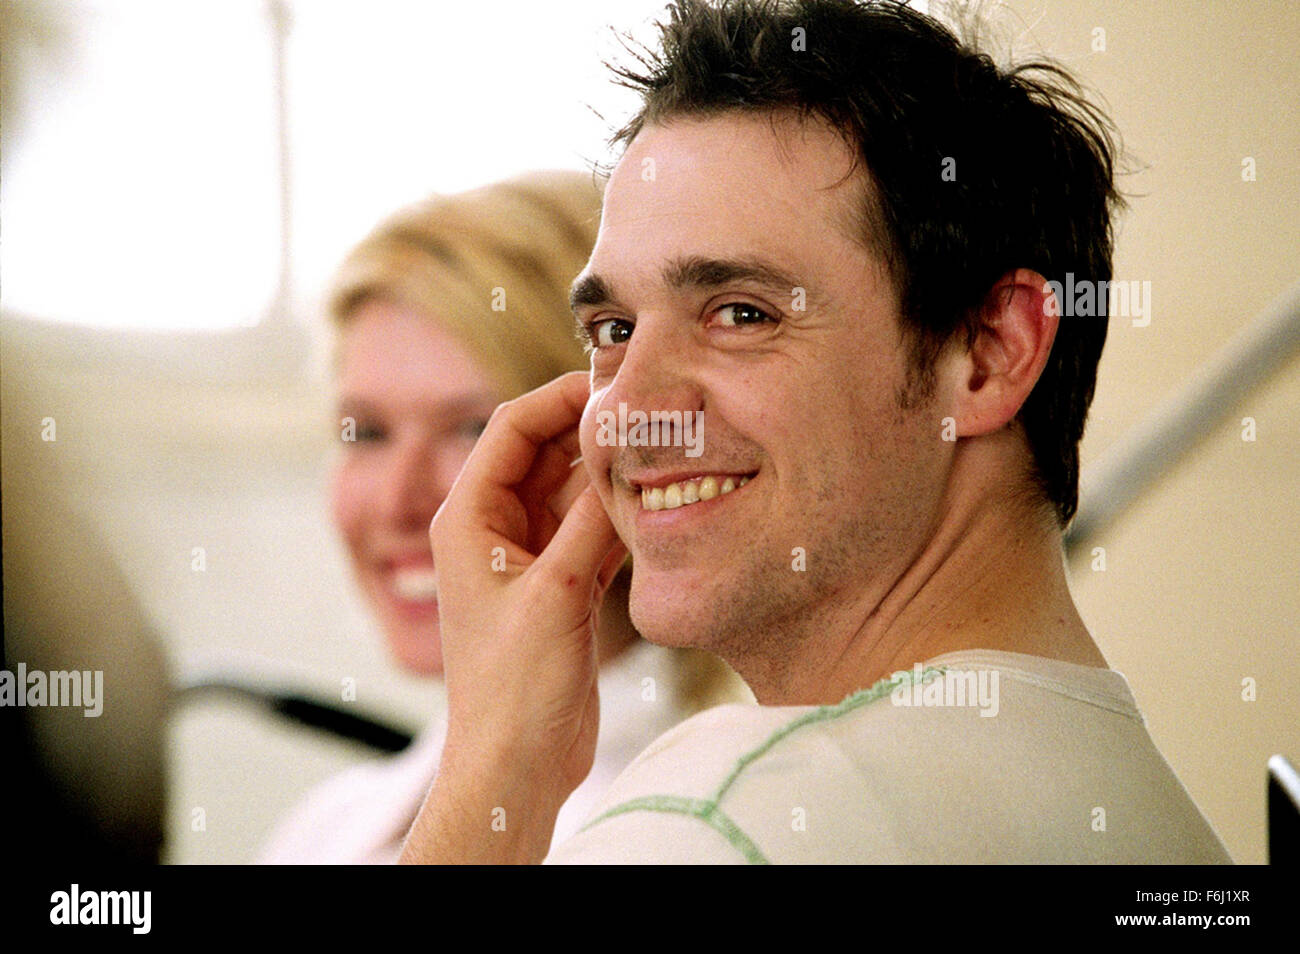 Nov 08, 2002; Glasgow, Scotland, UK; JAMIE SIVES stars as Wilbur in the comedy drama 'Wilbur Wants to Kill Himself' directed by Lone Scherfig. Stock Photo